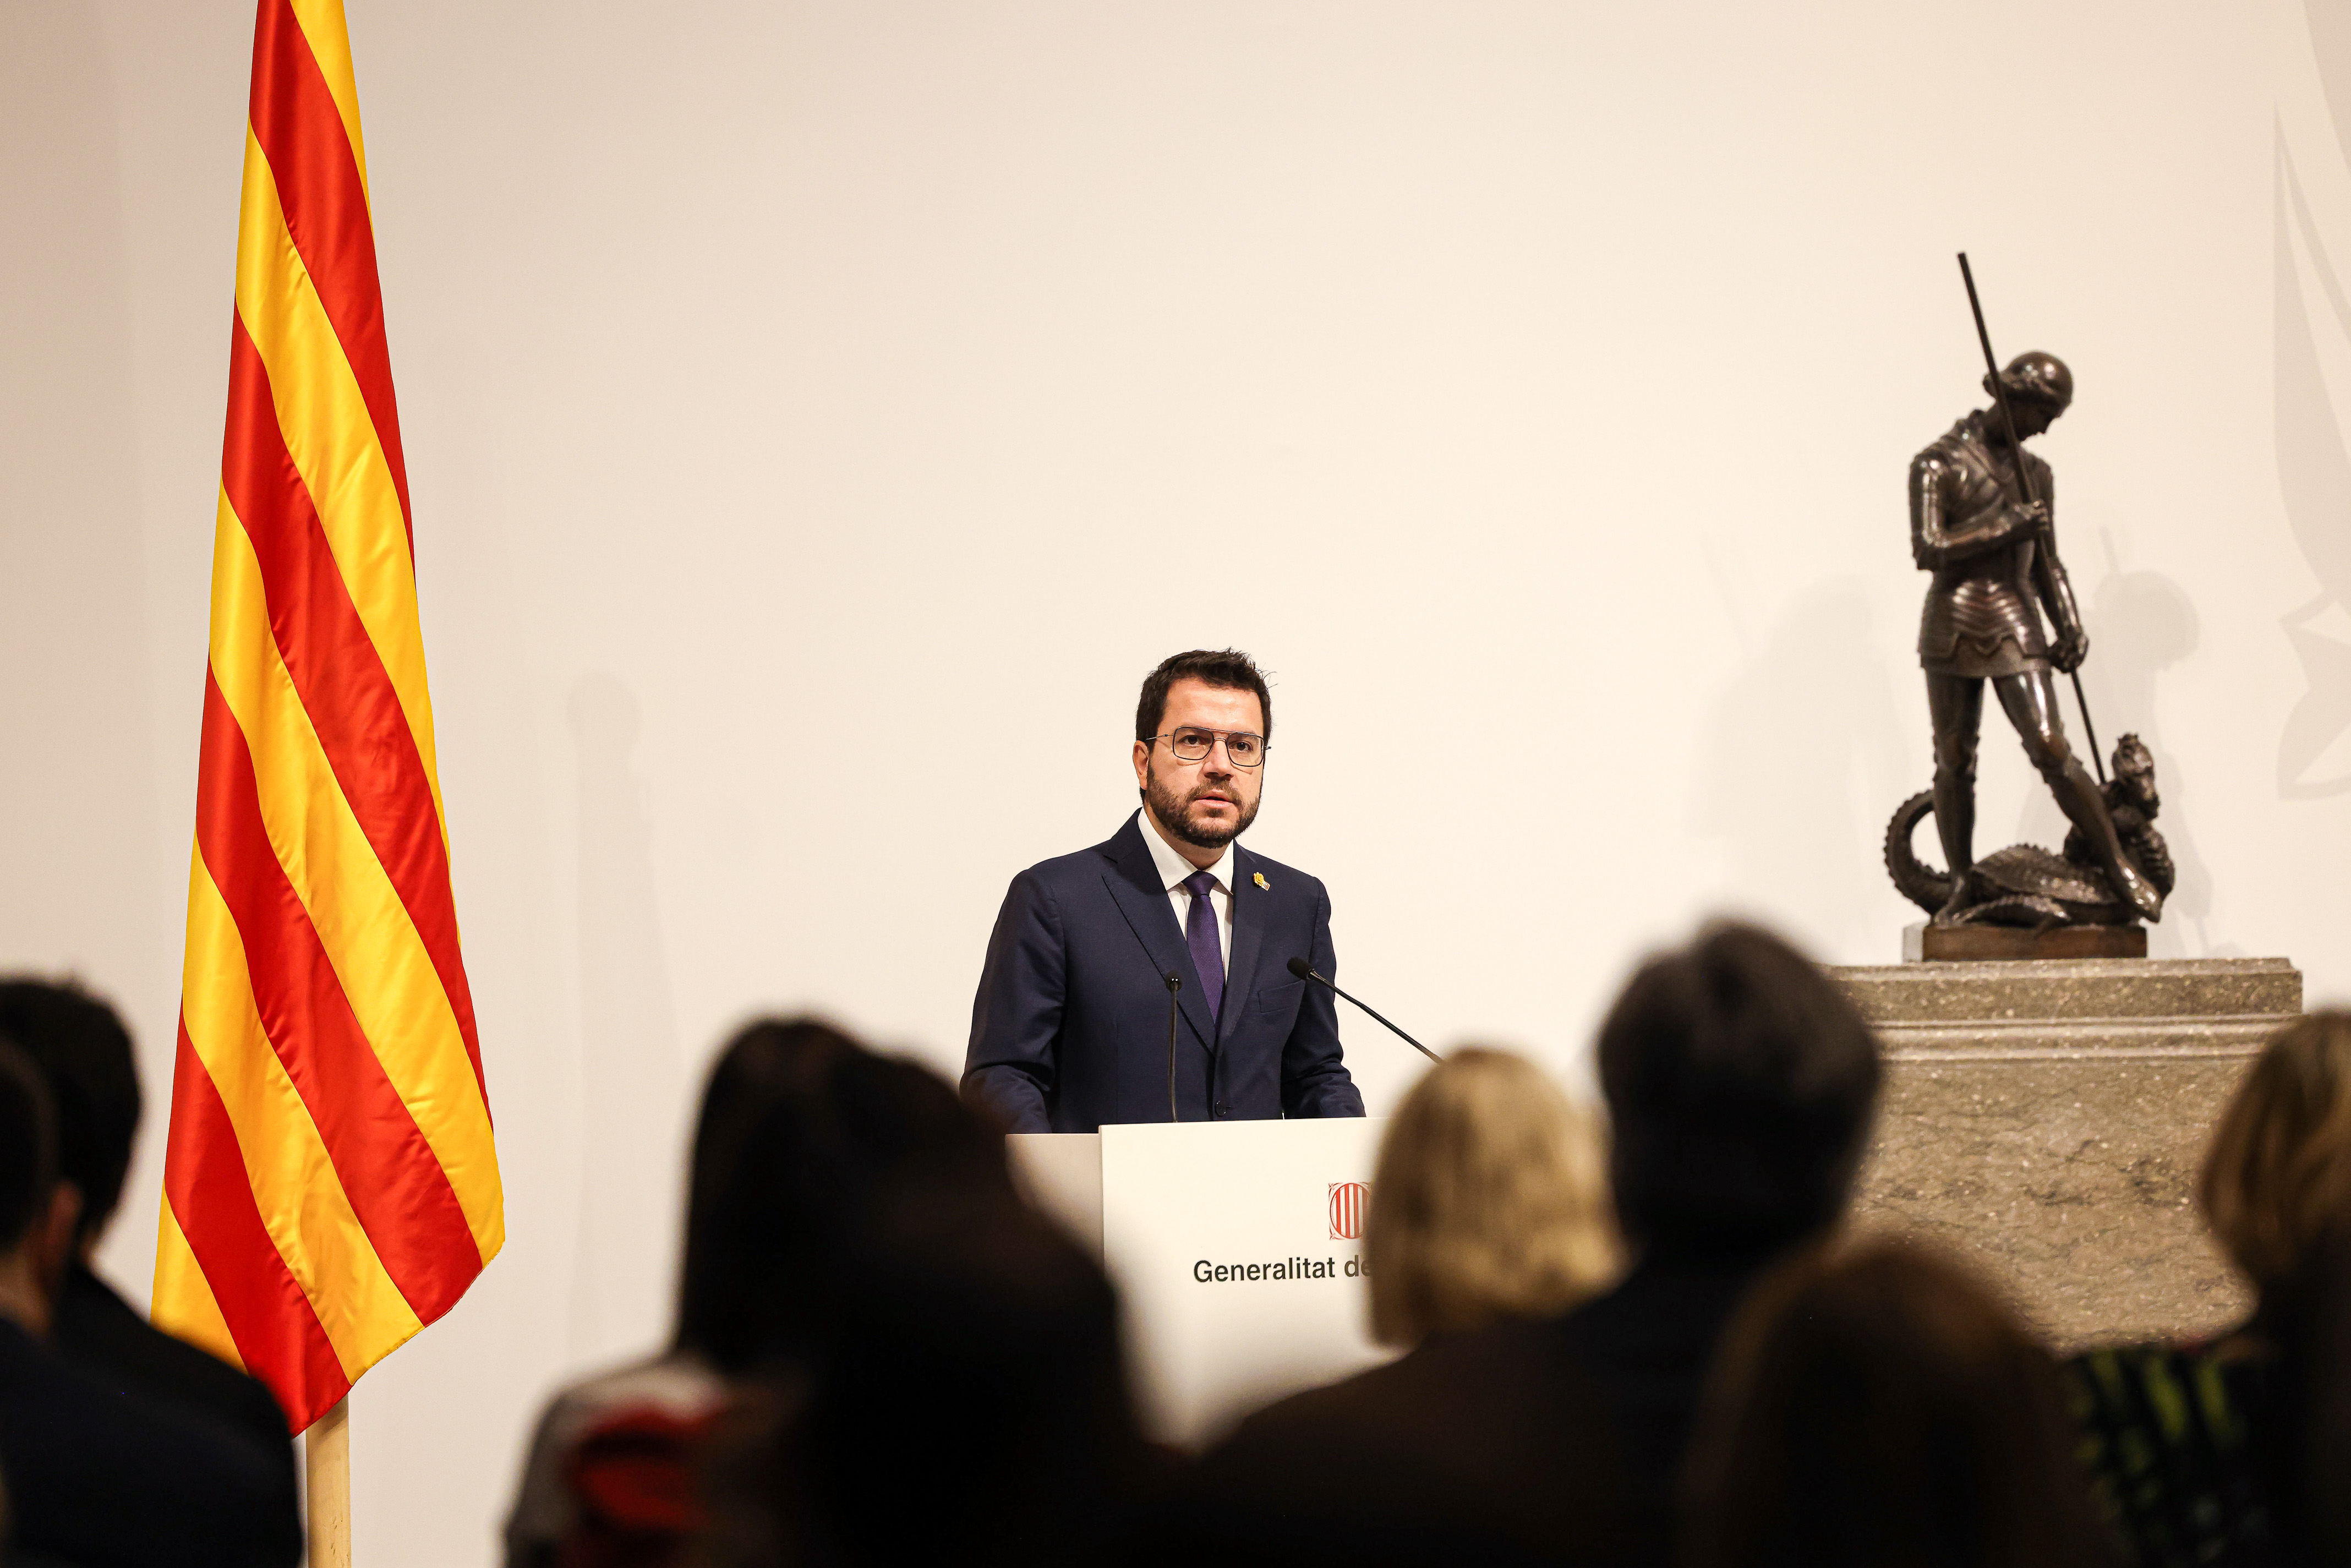 Catalan president Pere Aragonès during a speech in the government headquarters on October 11, 2022